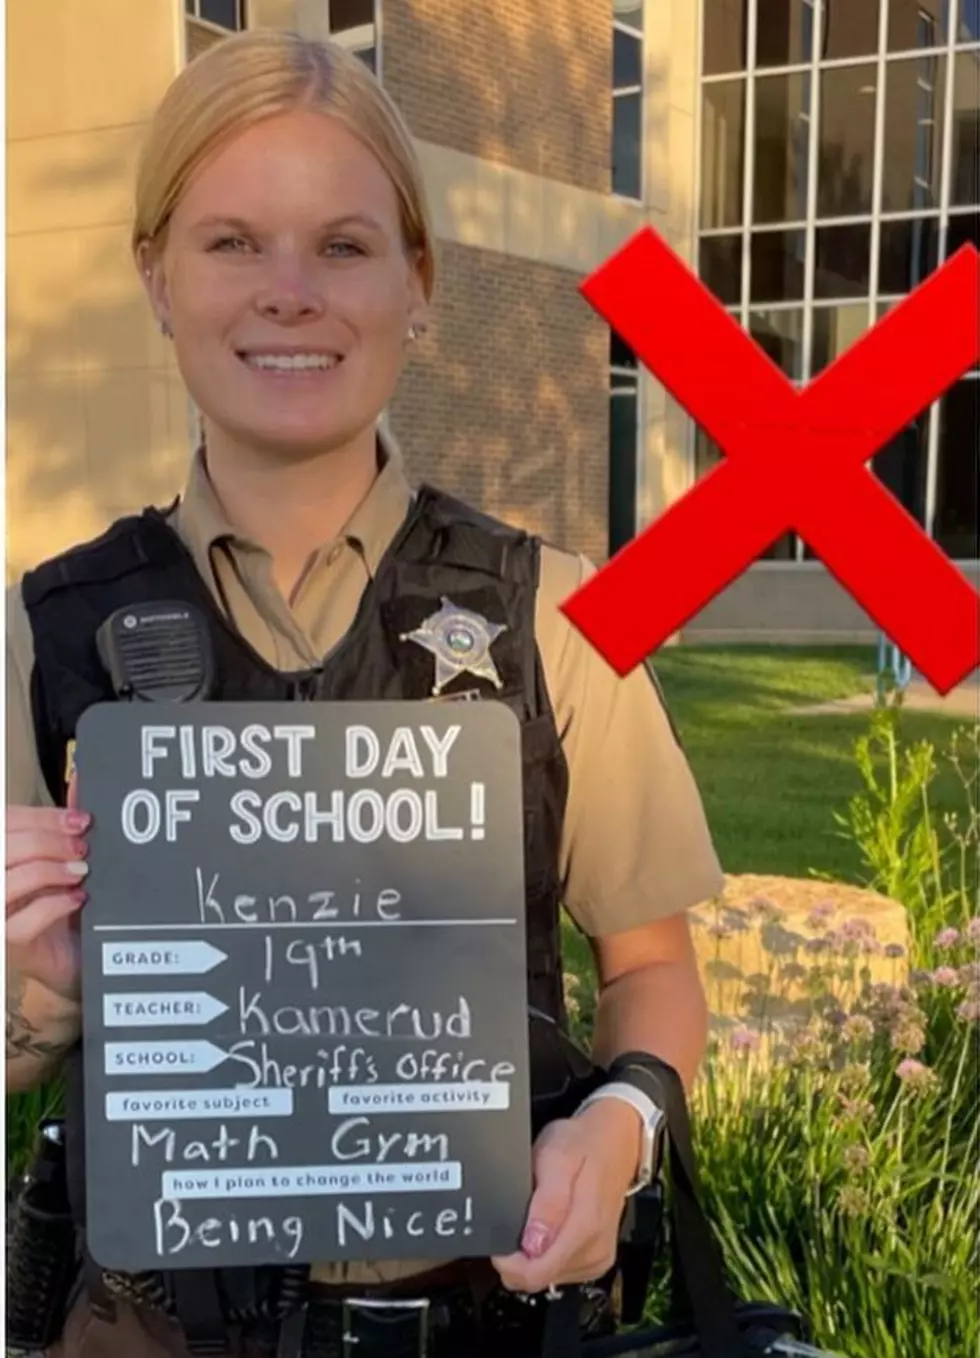 Remember This Tip From The Sheriff’s Office Before You Post Back to School Photos